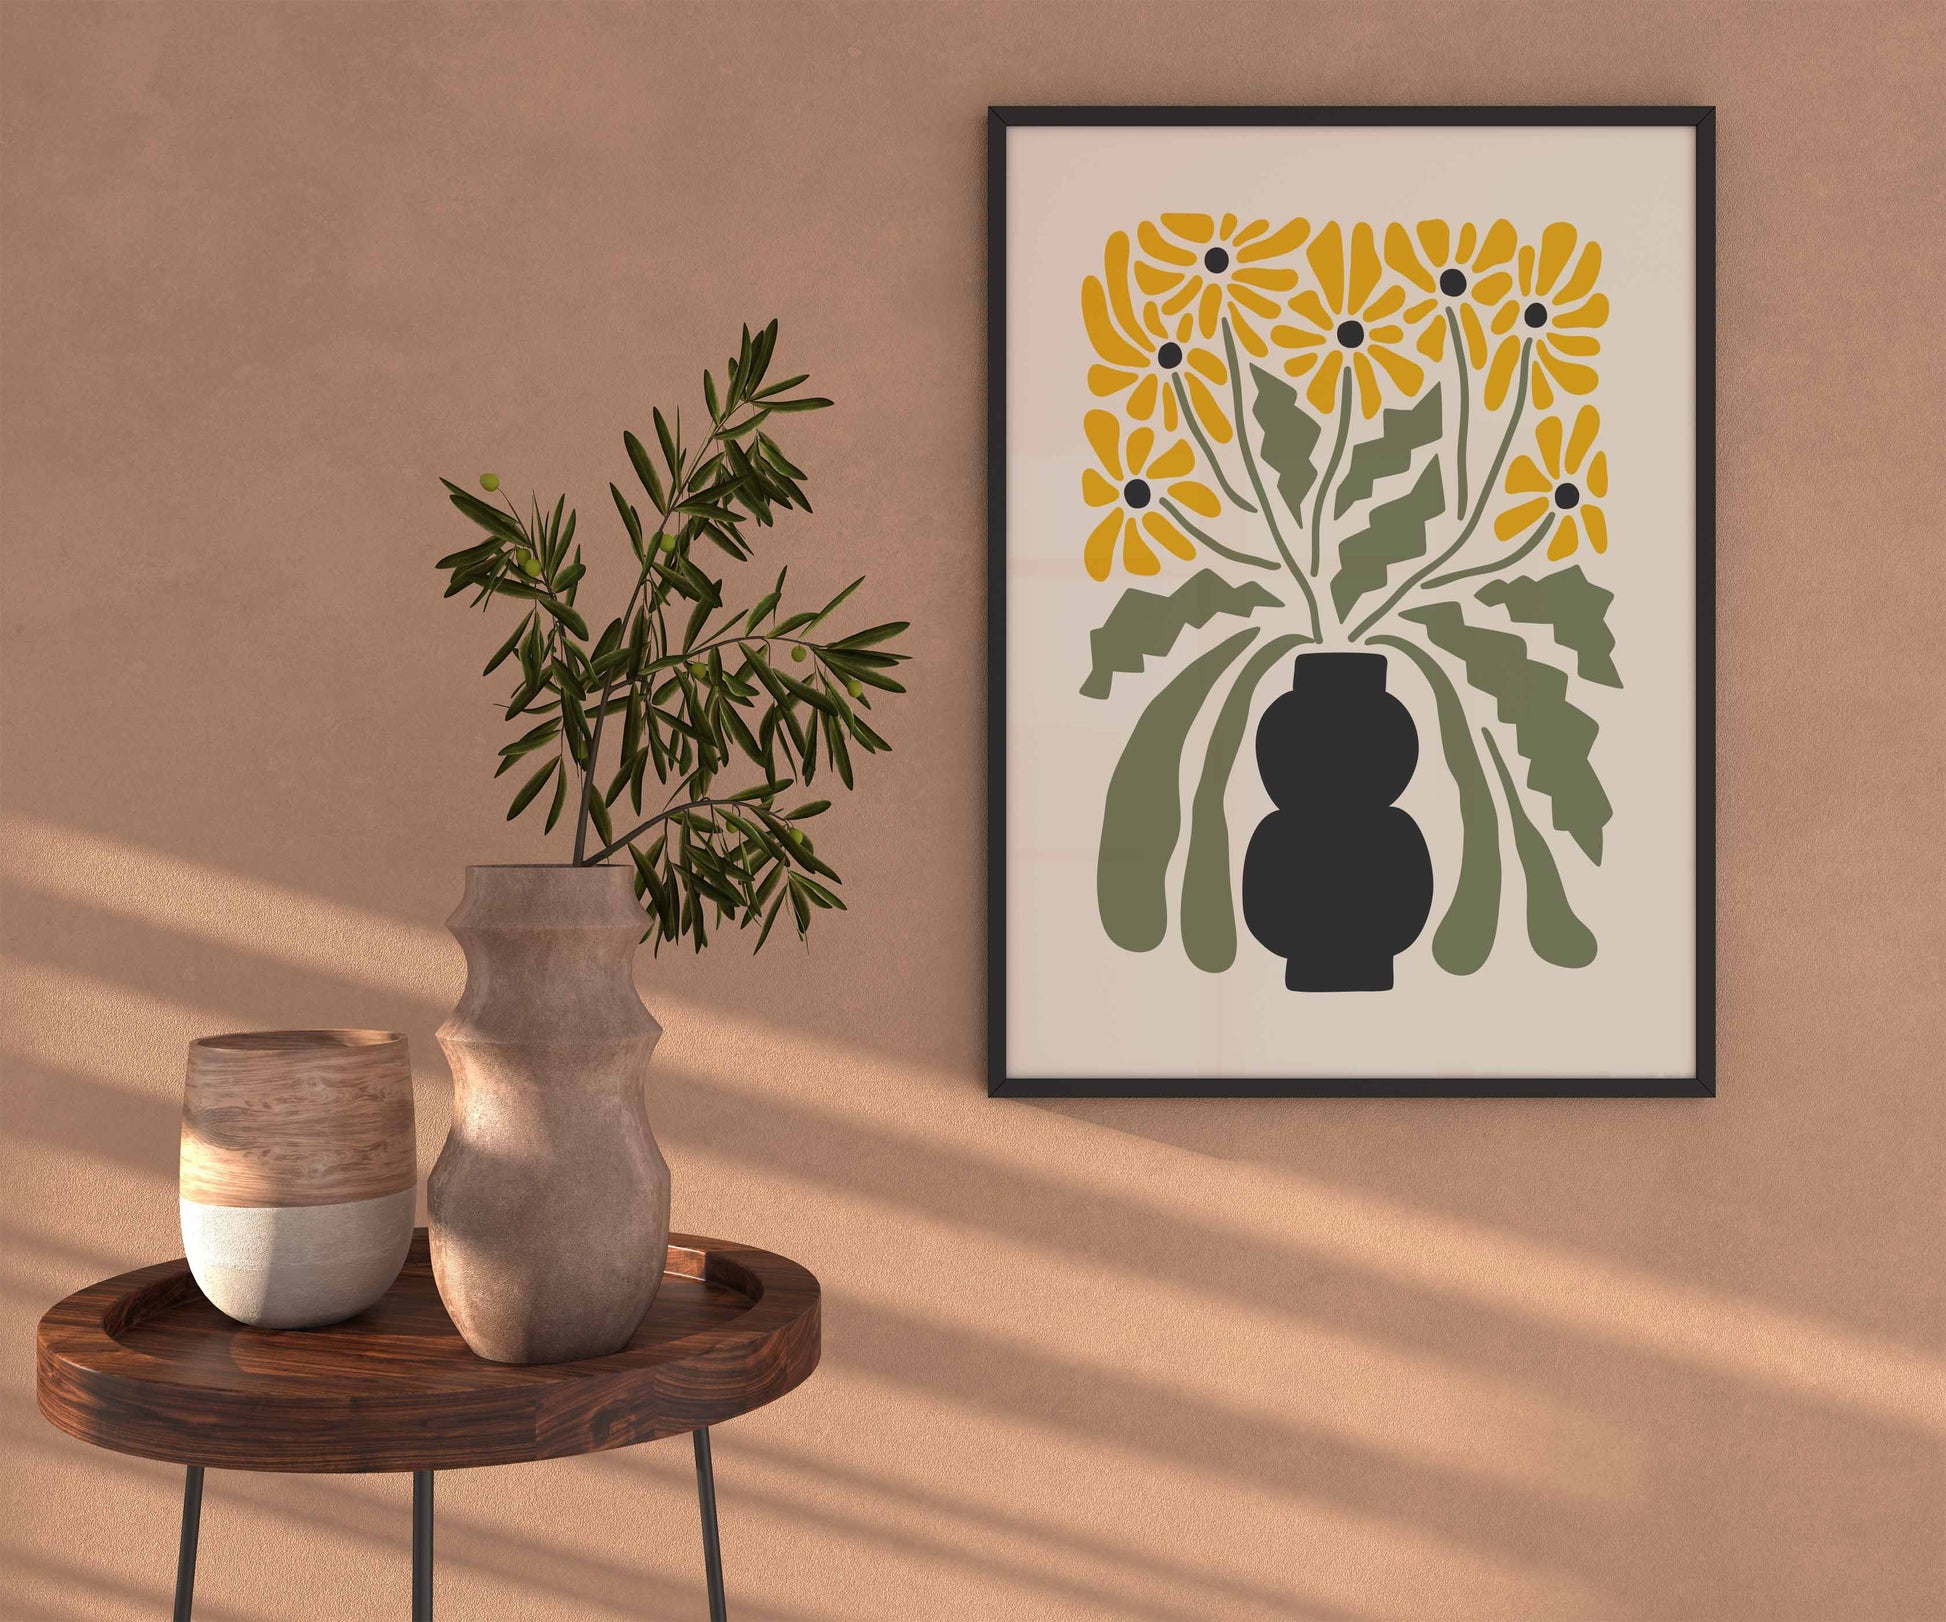 Flower wall art print in green and yellow